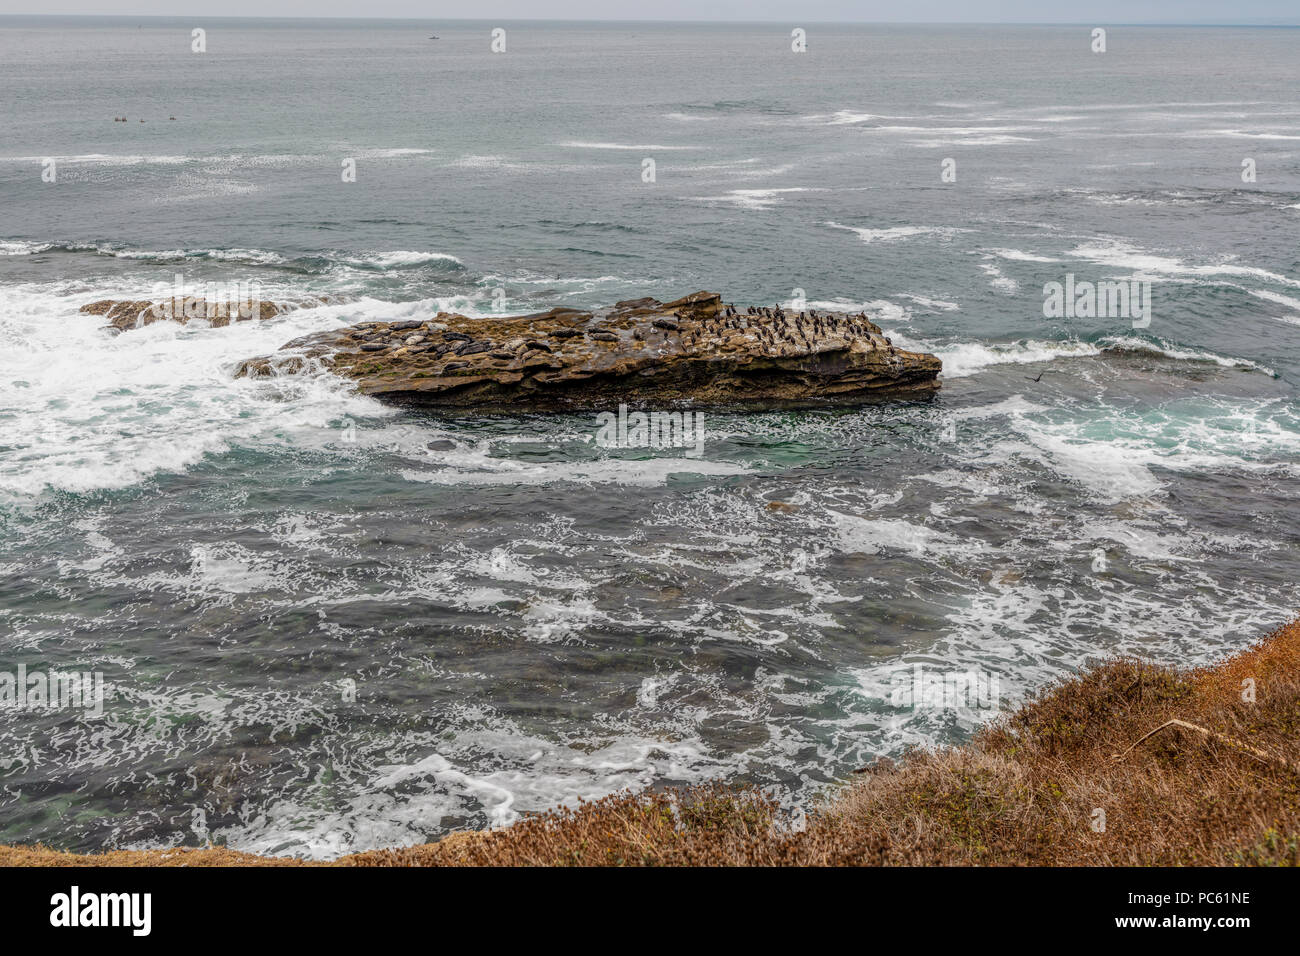 cormorants and seabirds next to a group of Sea Lions basking in the sun on the rocks at La Jolla Cove, La Jolla, San Diego, California, USA Stock Photo